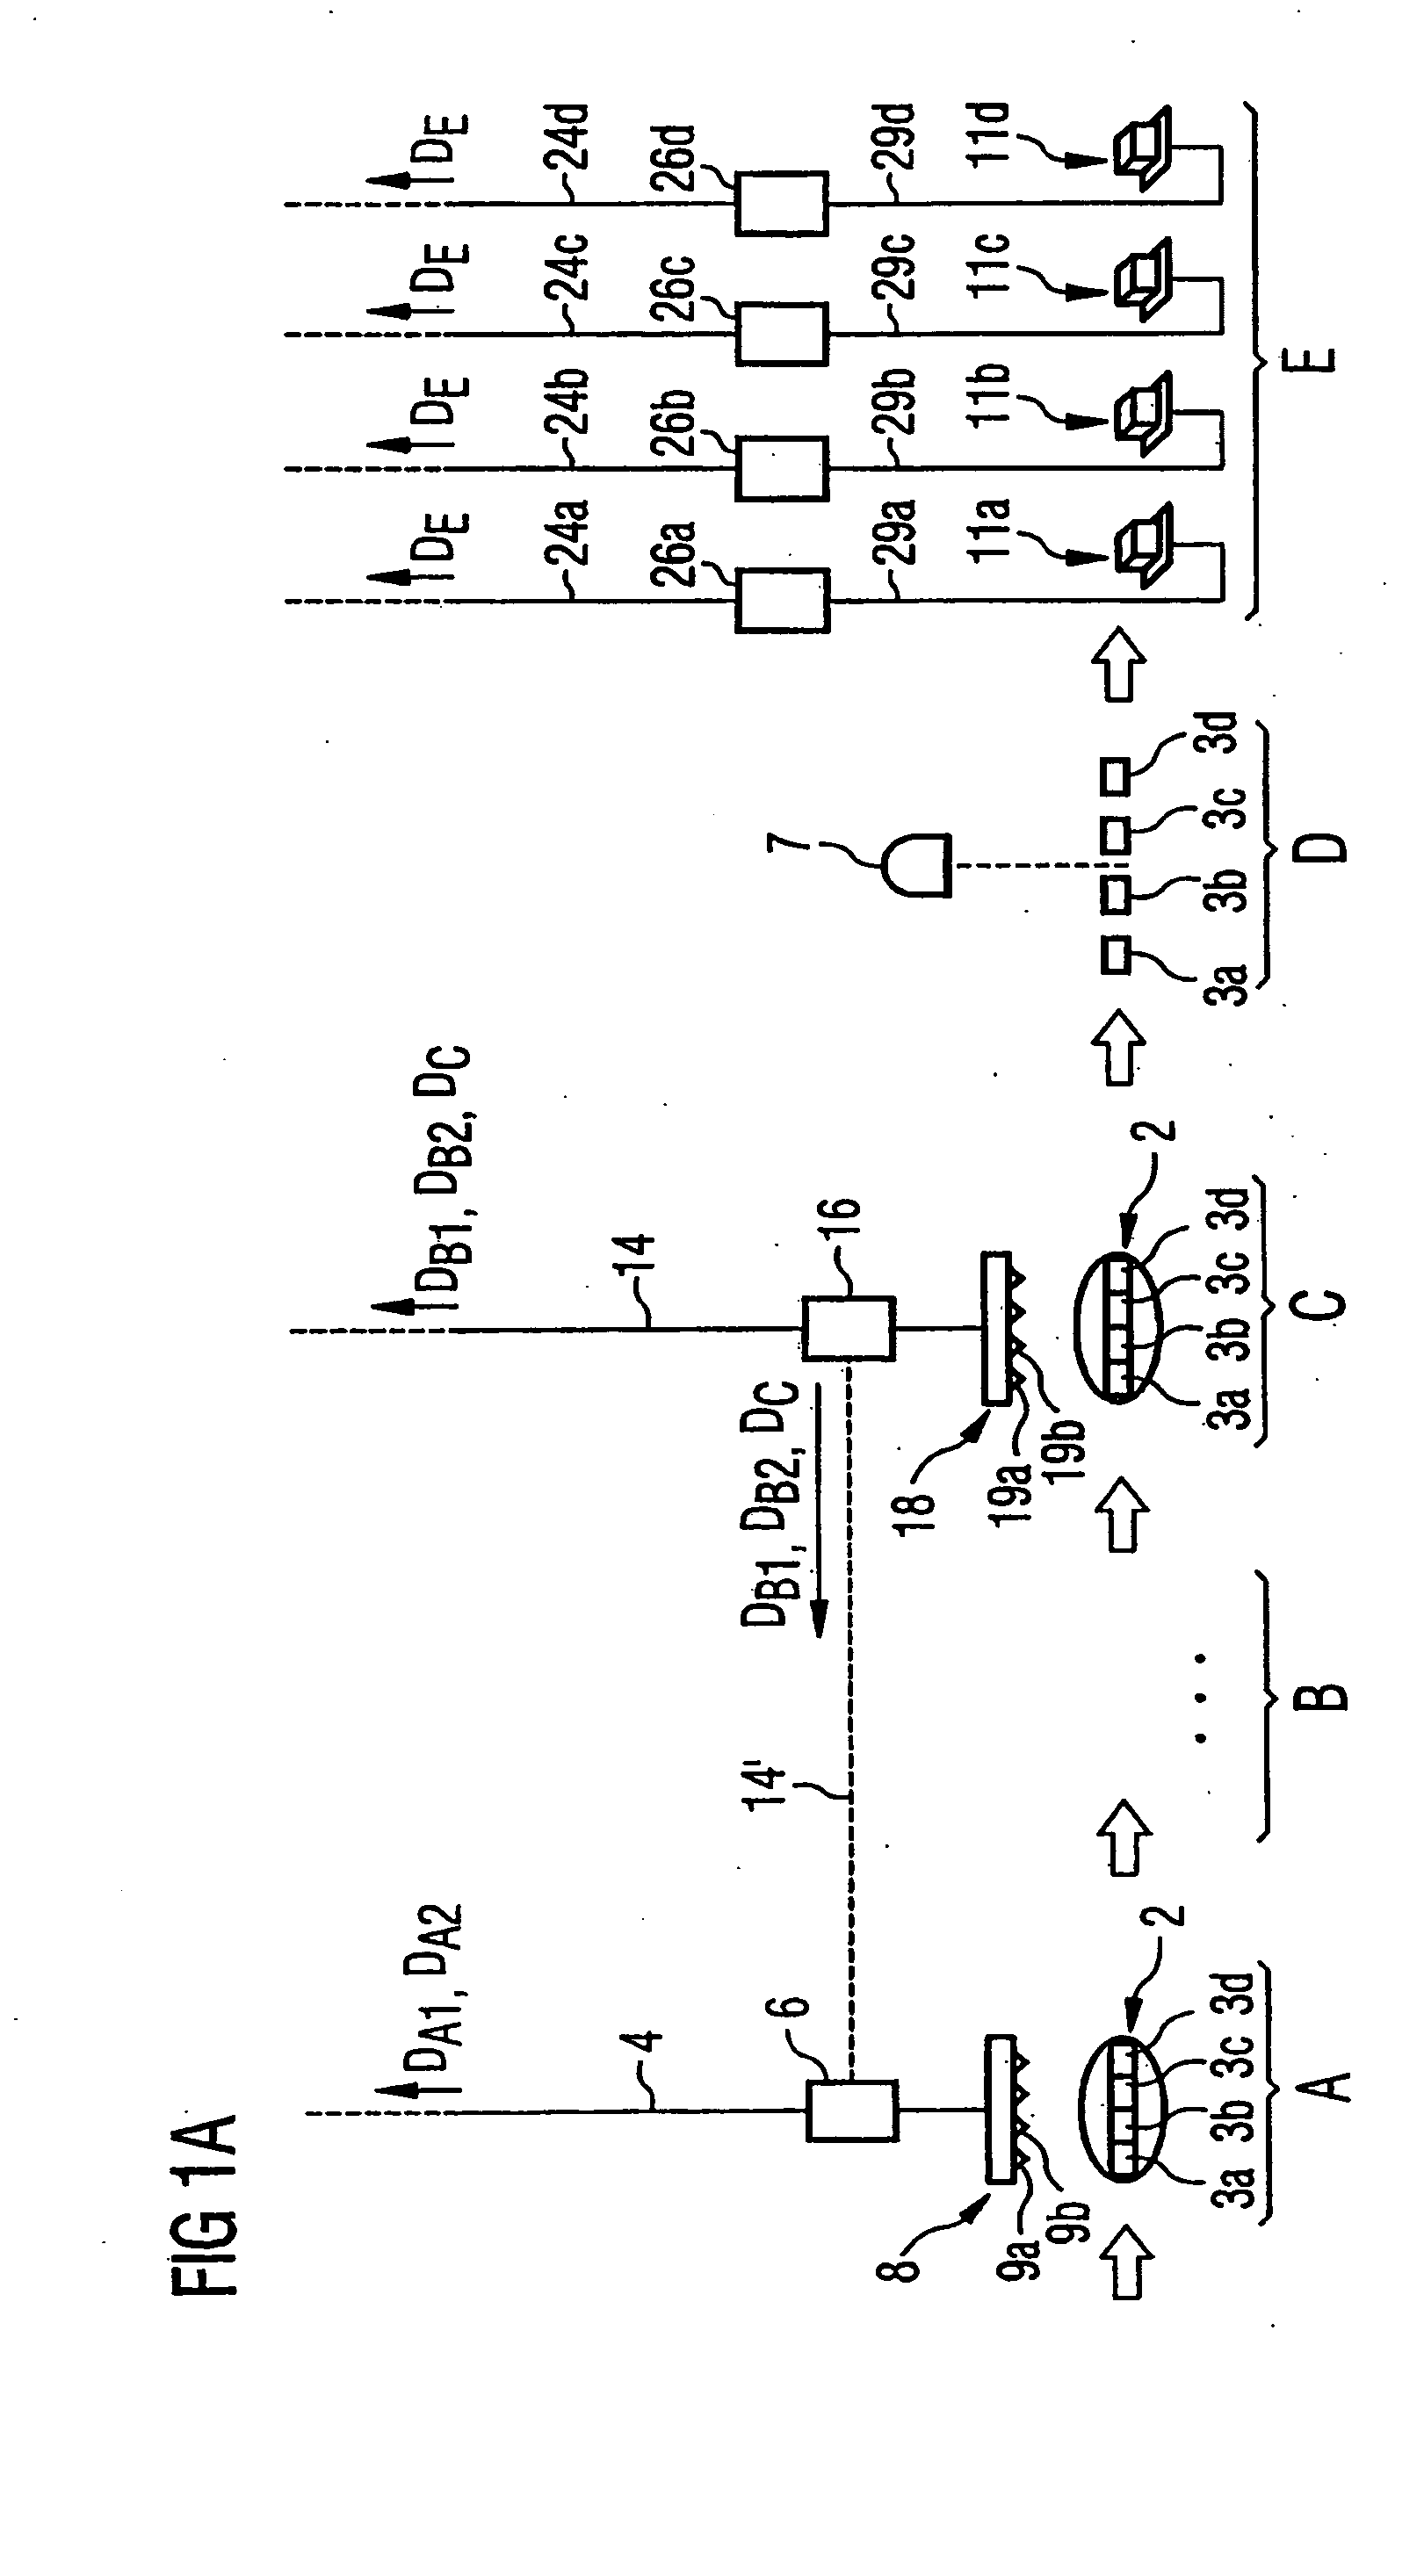 Semi-conductor component testing process and system for testing semi-conductor components